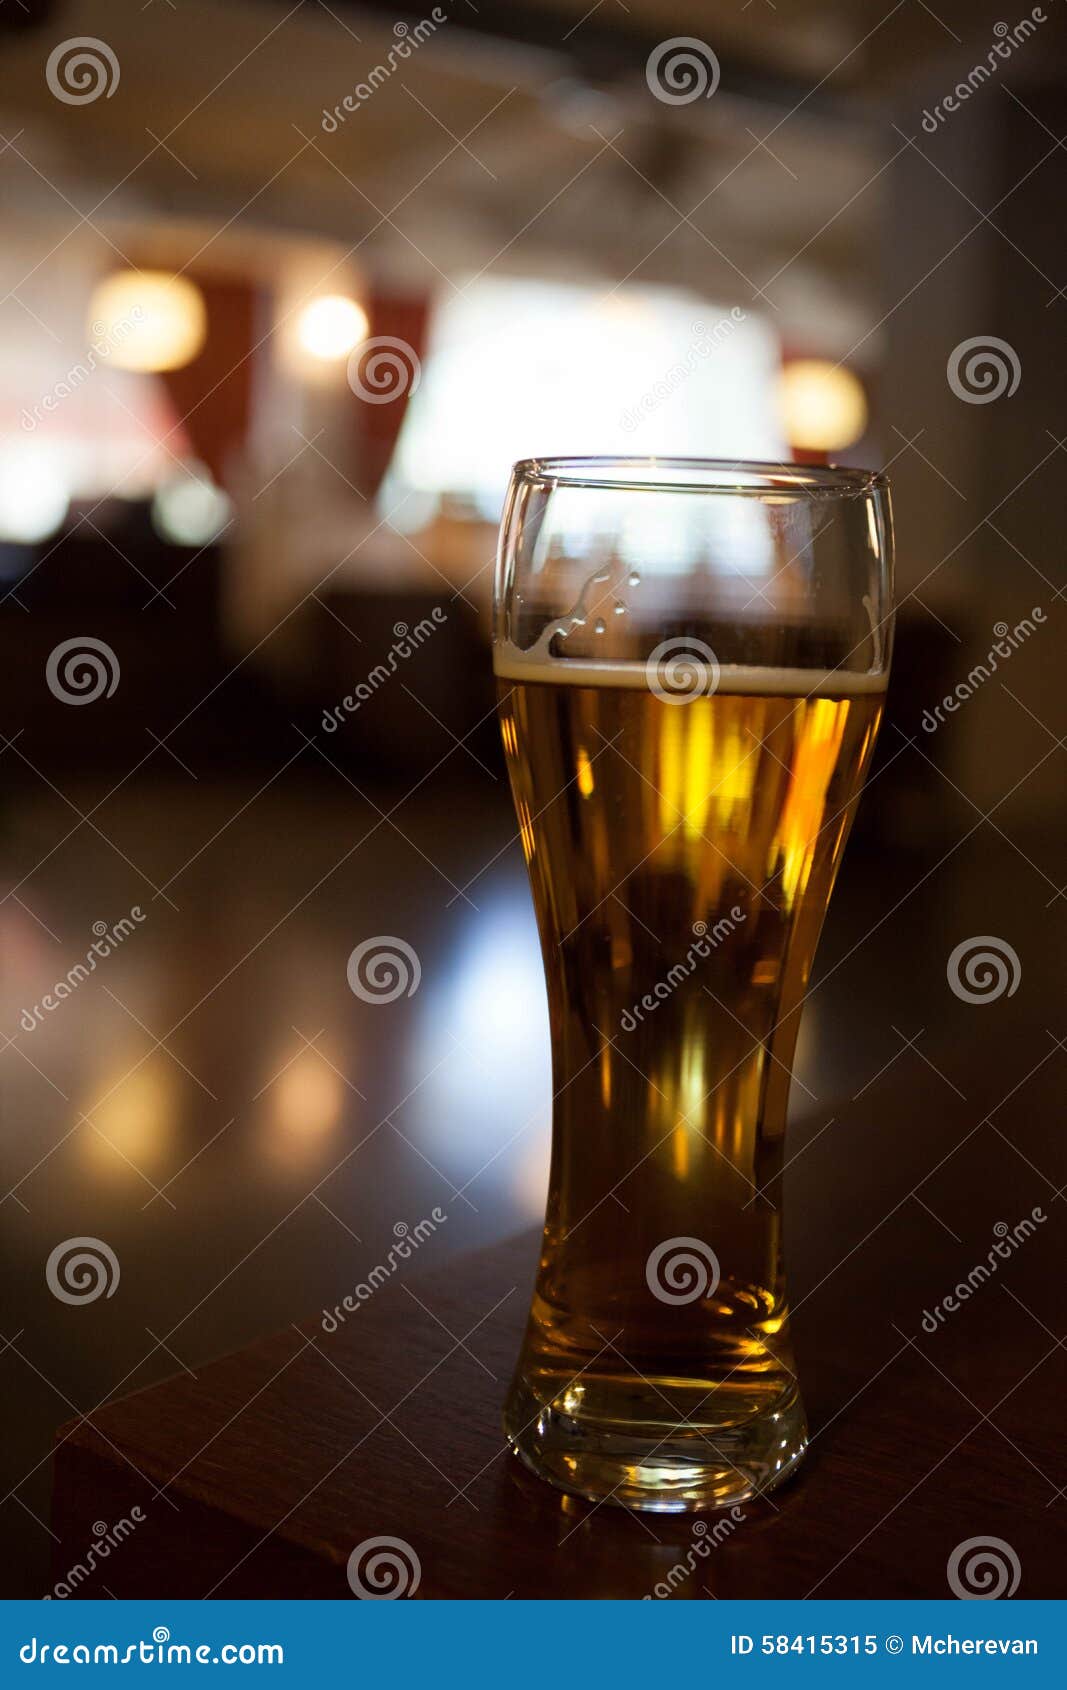 A glass of beer on the corner table in the restaurant.